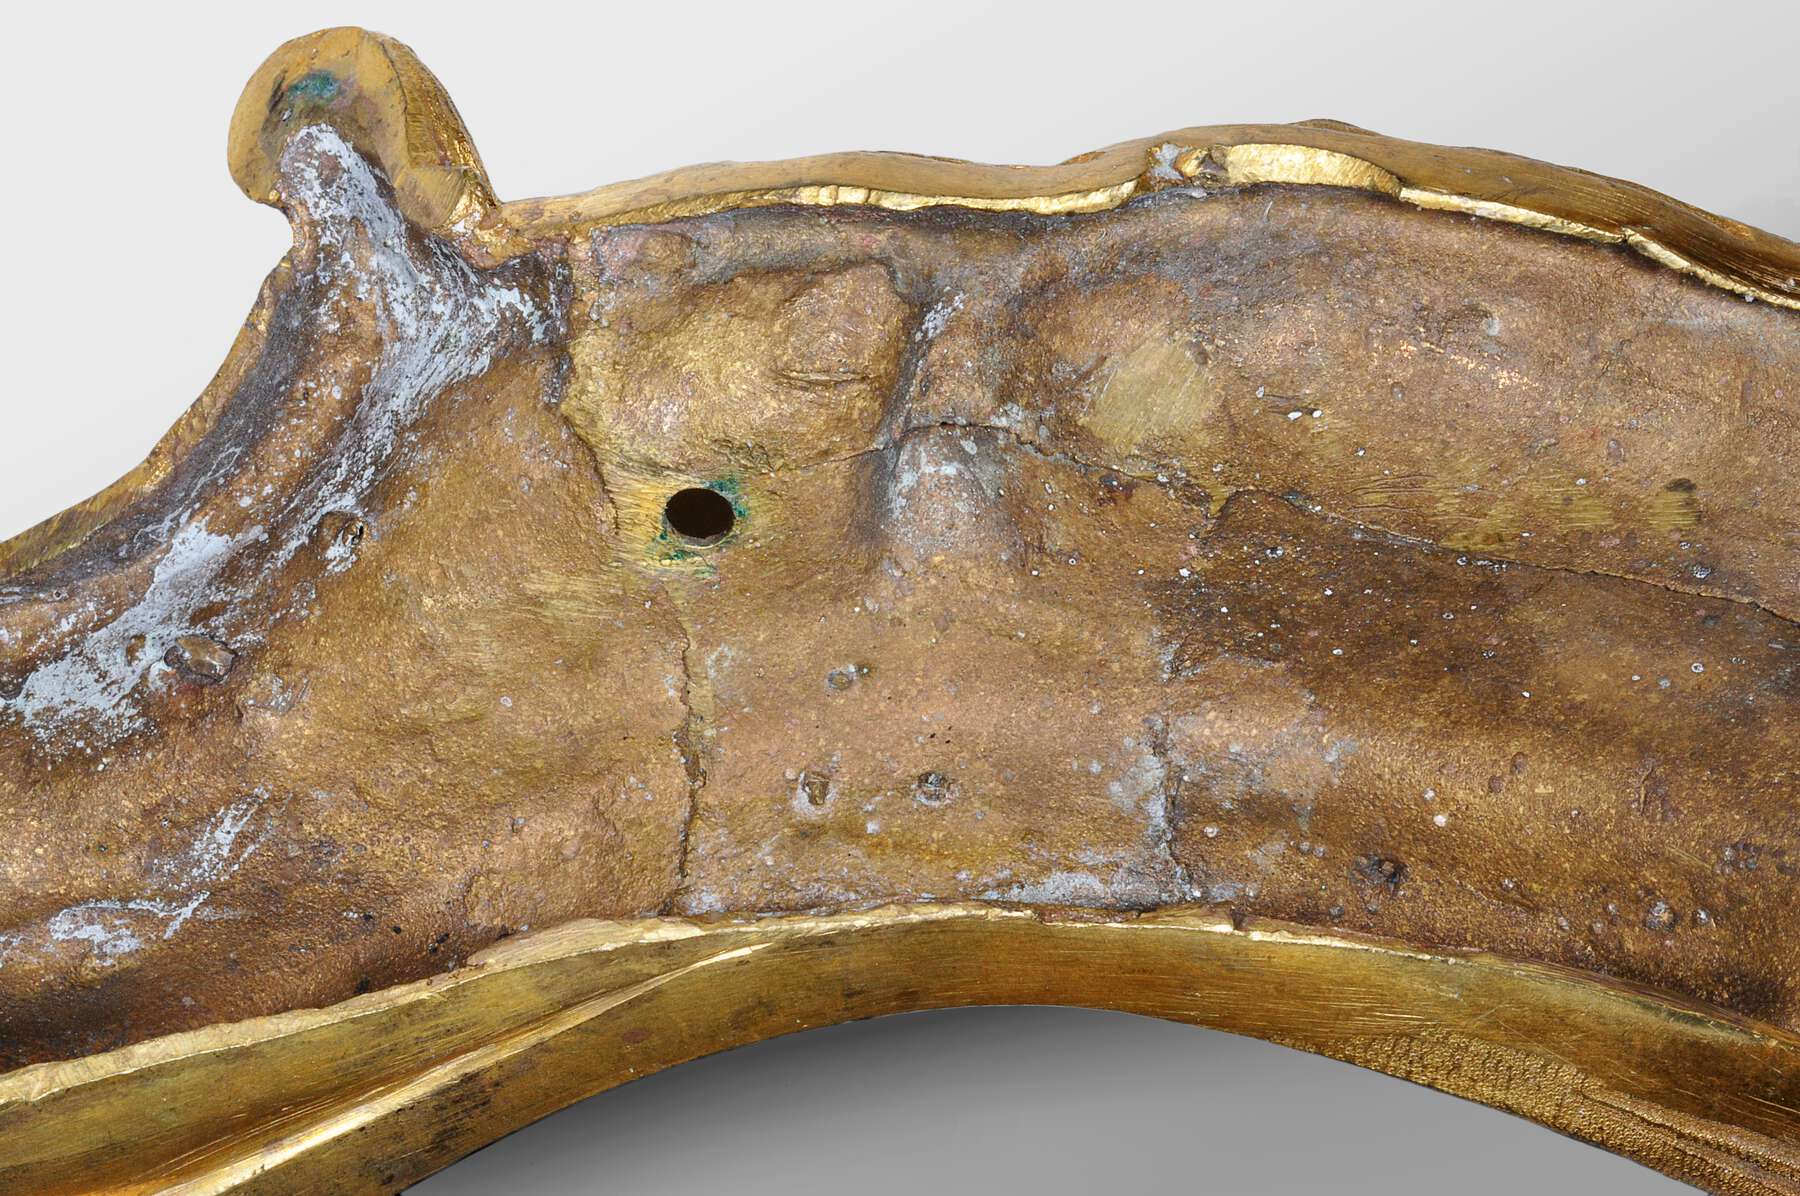 detail of one of the mounts from behind, revealing a smooth, sanded surface with a circular hole